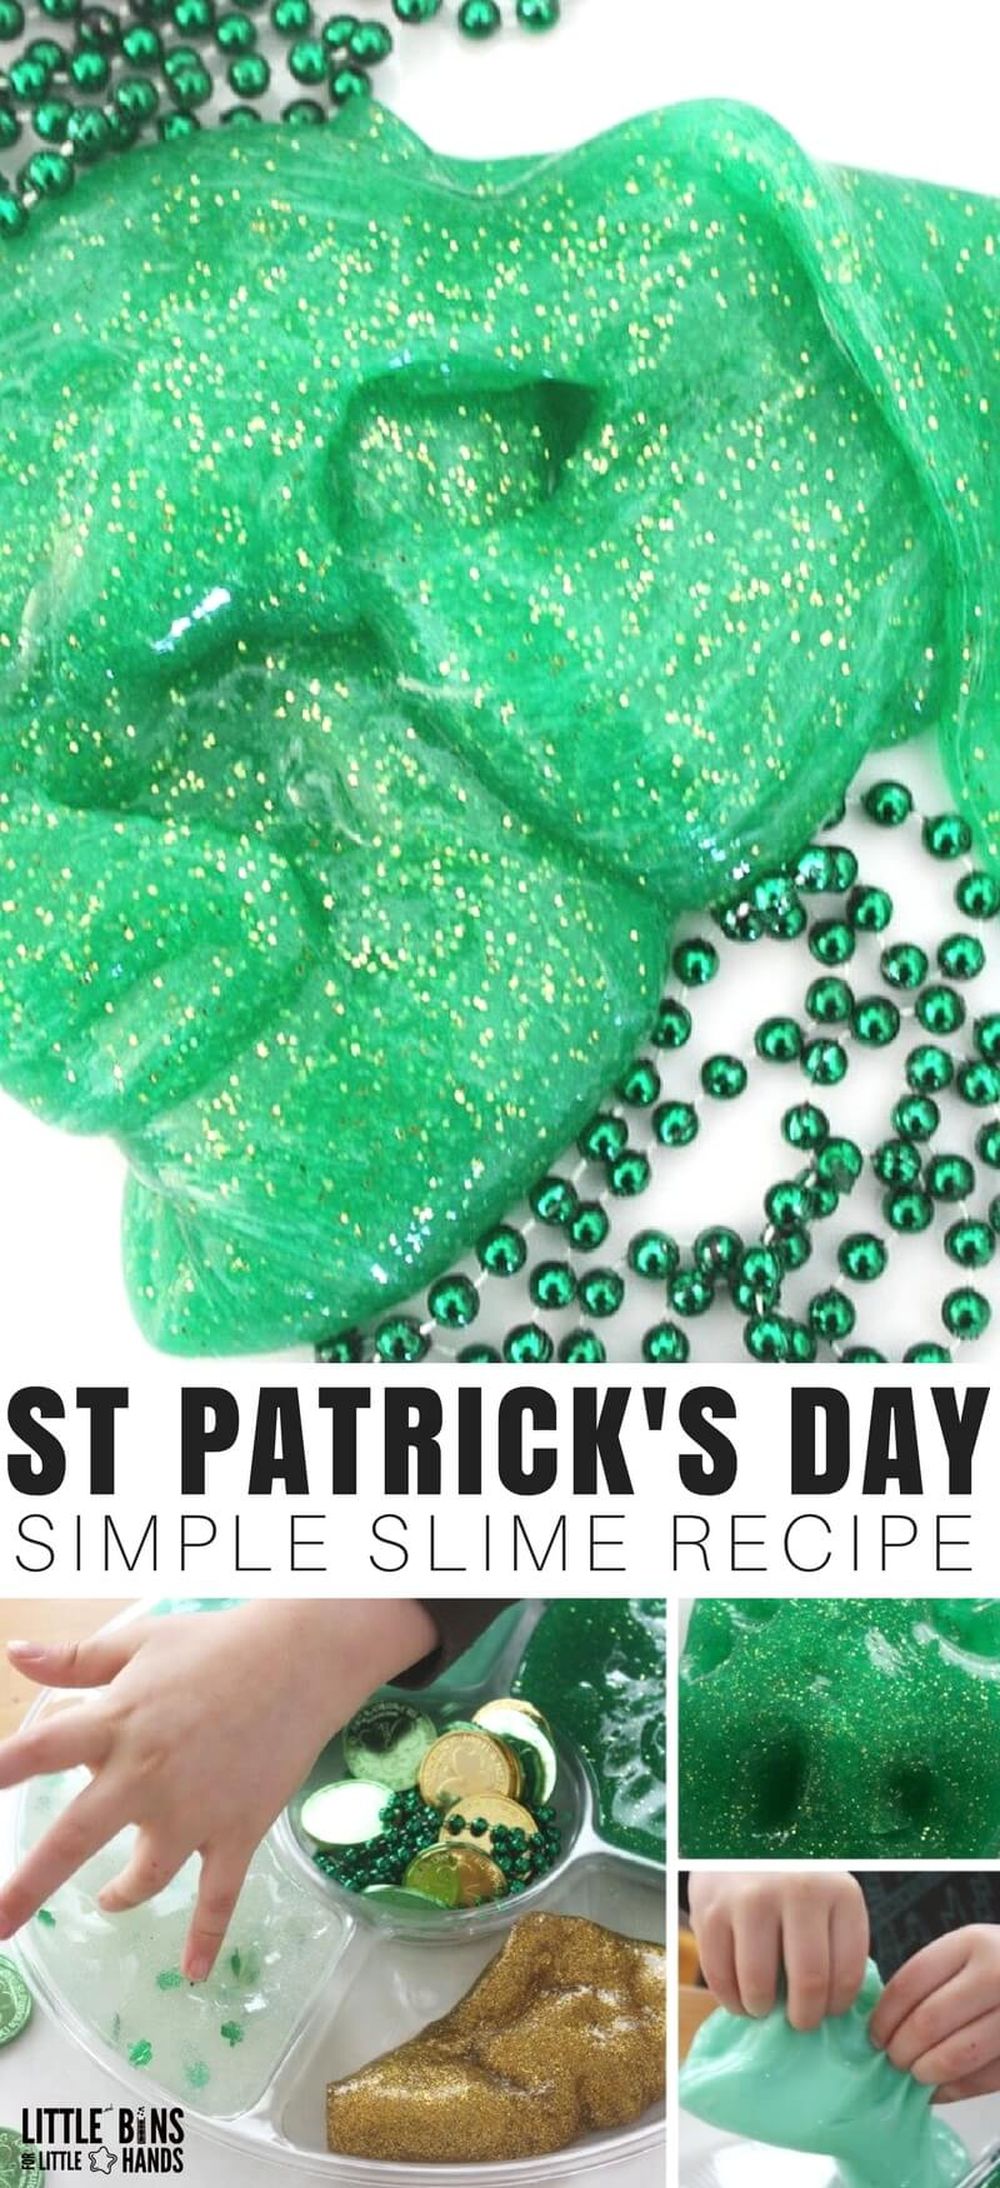 Simple easy st patrick's day crafts green slime